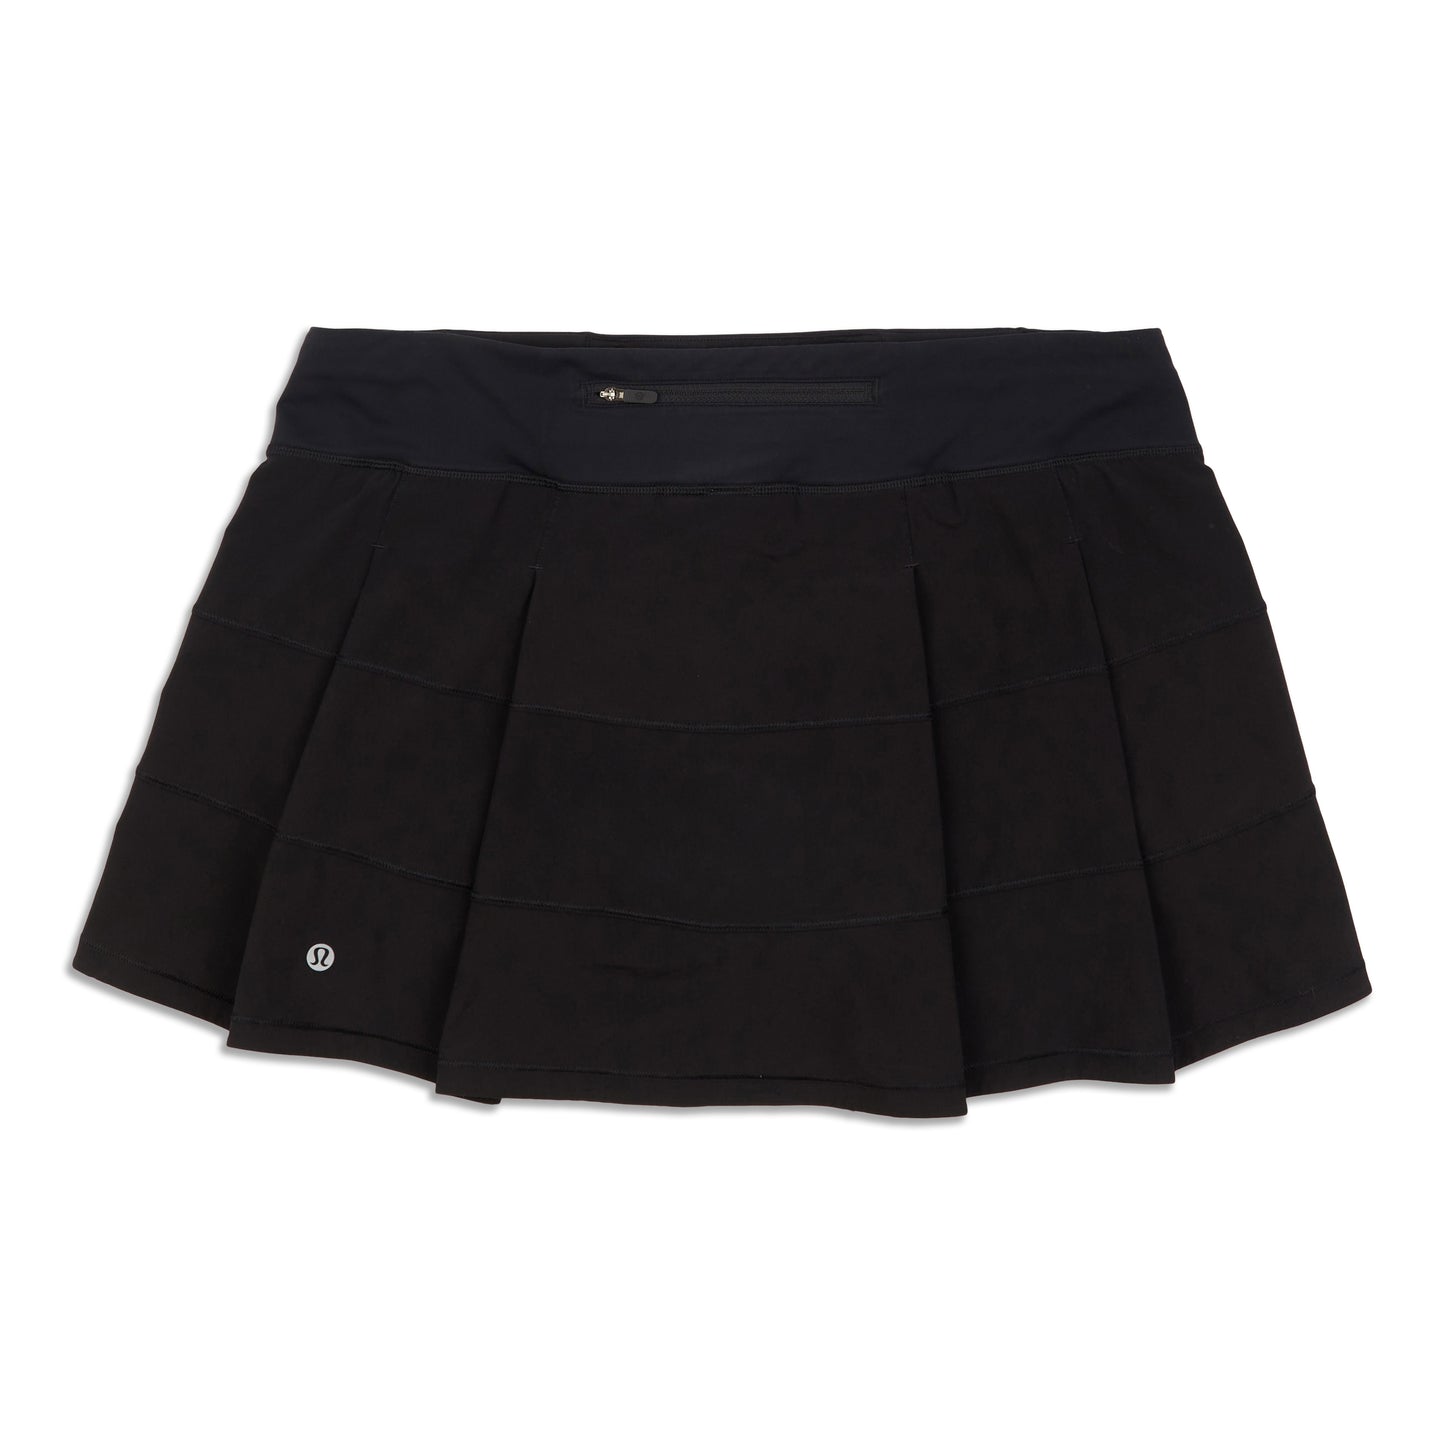 Pace Rival Mid-Rise Skirt Long - Resale